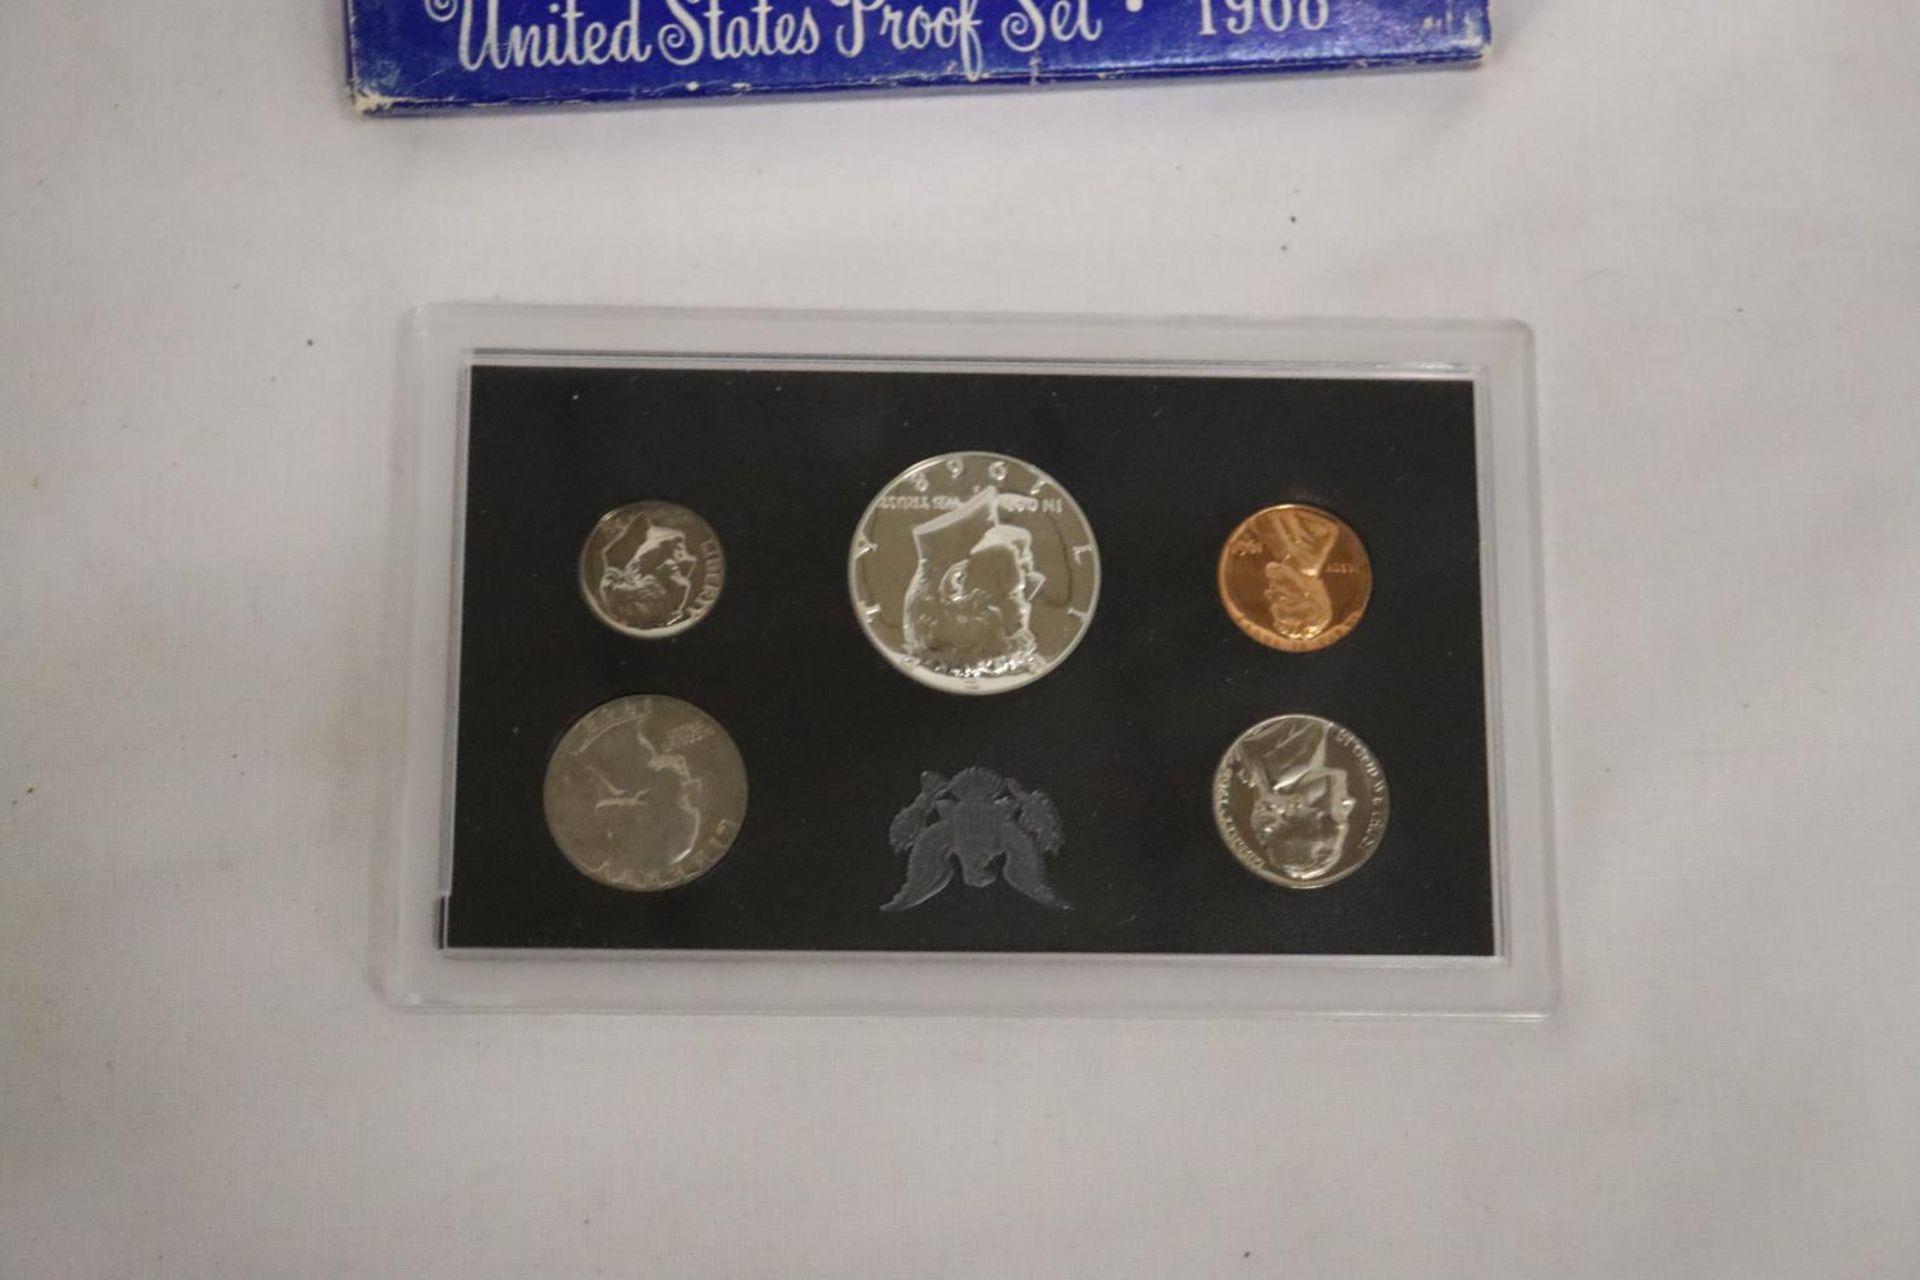 A 1968 UNITED STATES PROOF SET OF COINS - Image 5 of 5